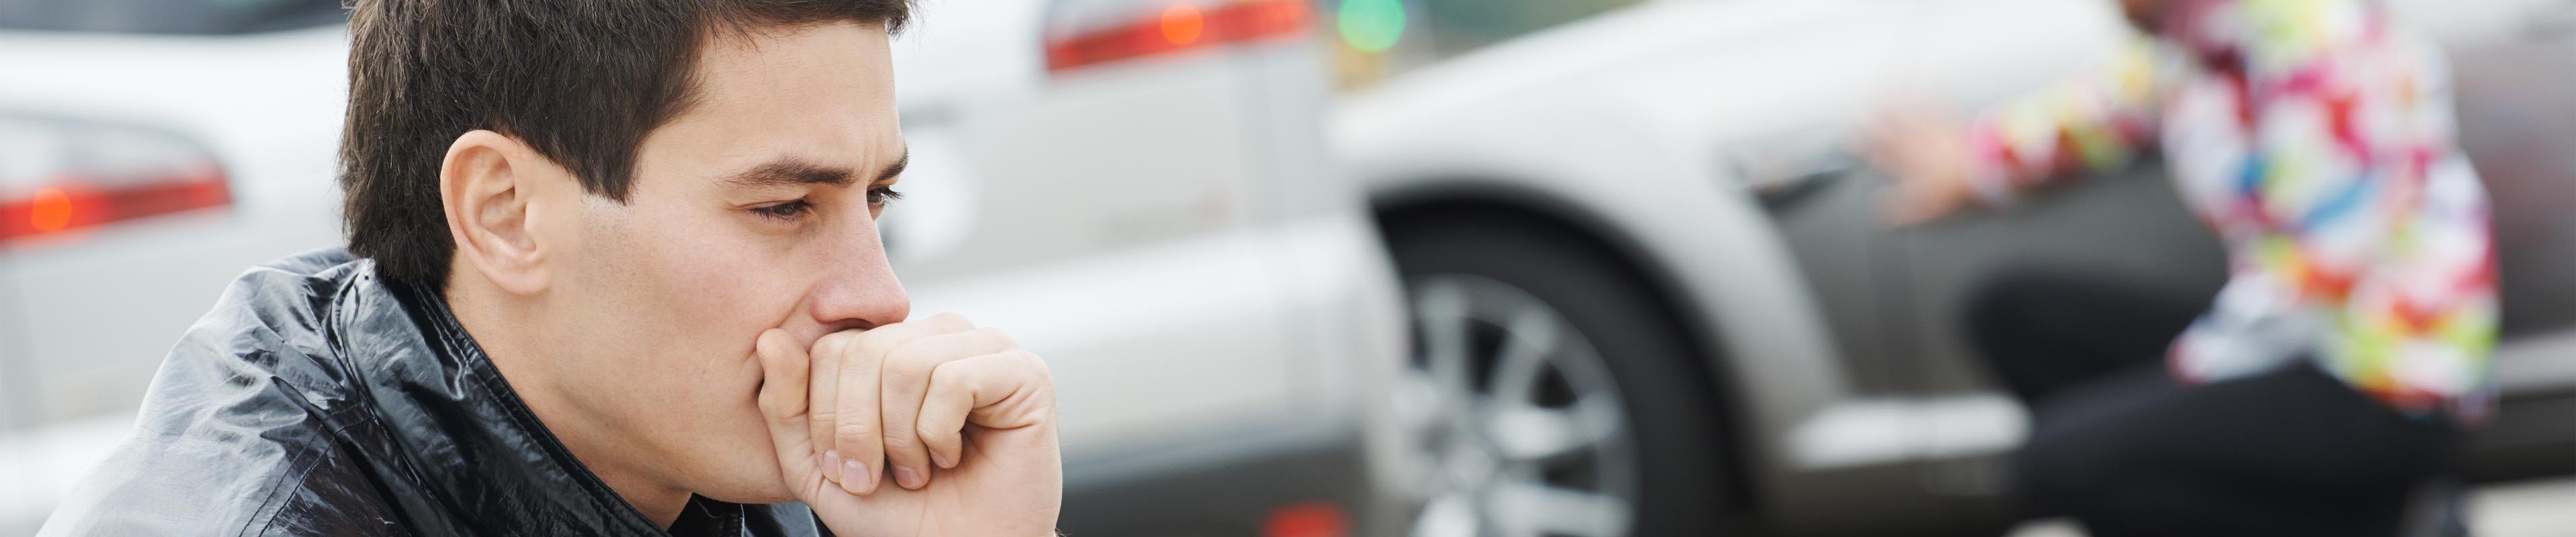 man sitting in front of a car accident looking worried